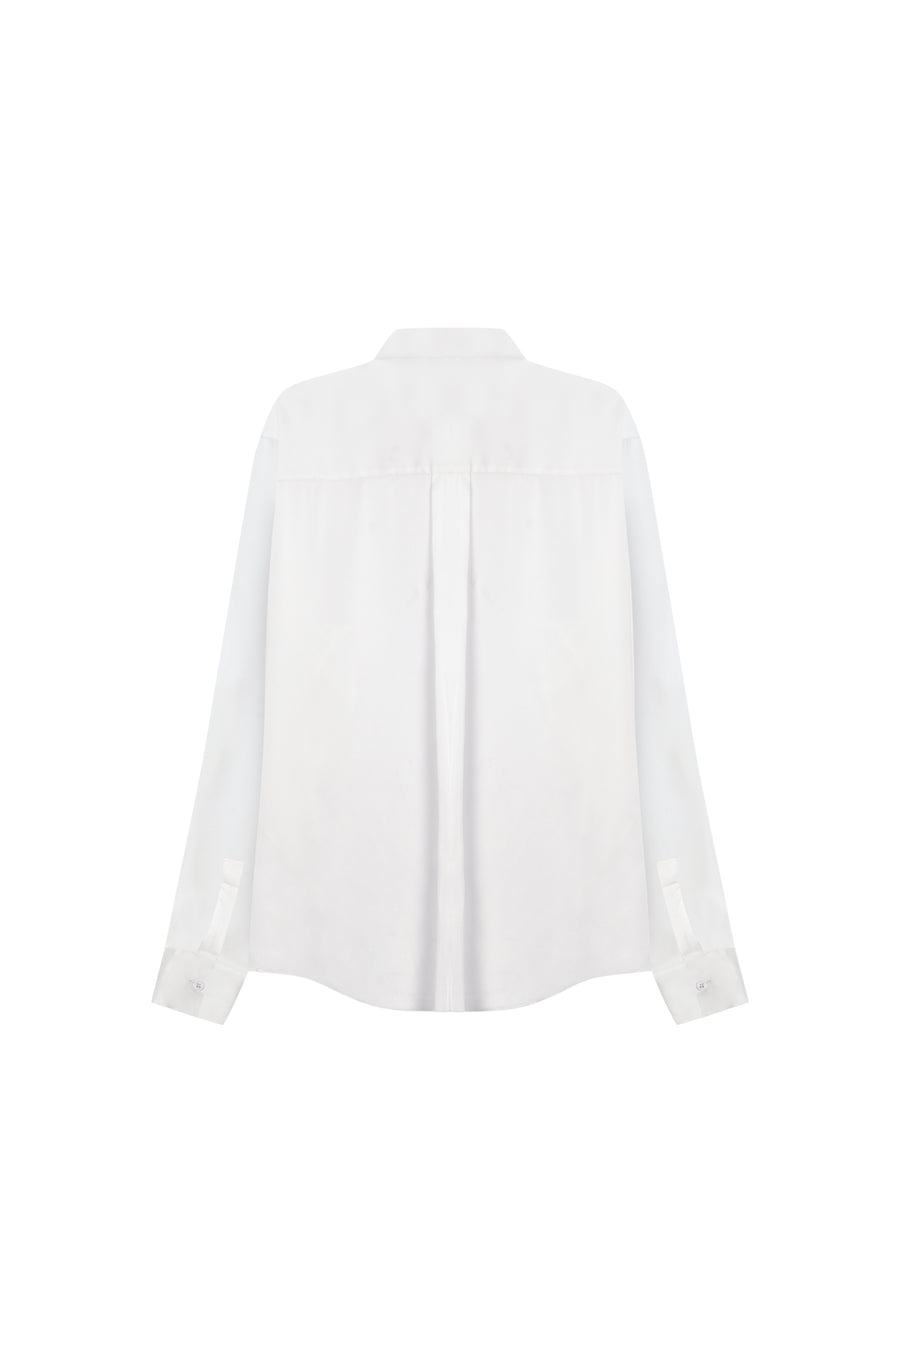 The Pierre pearl satin shirt